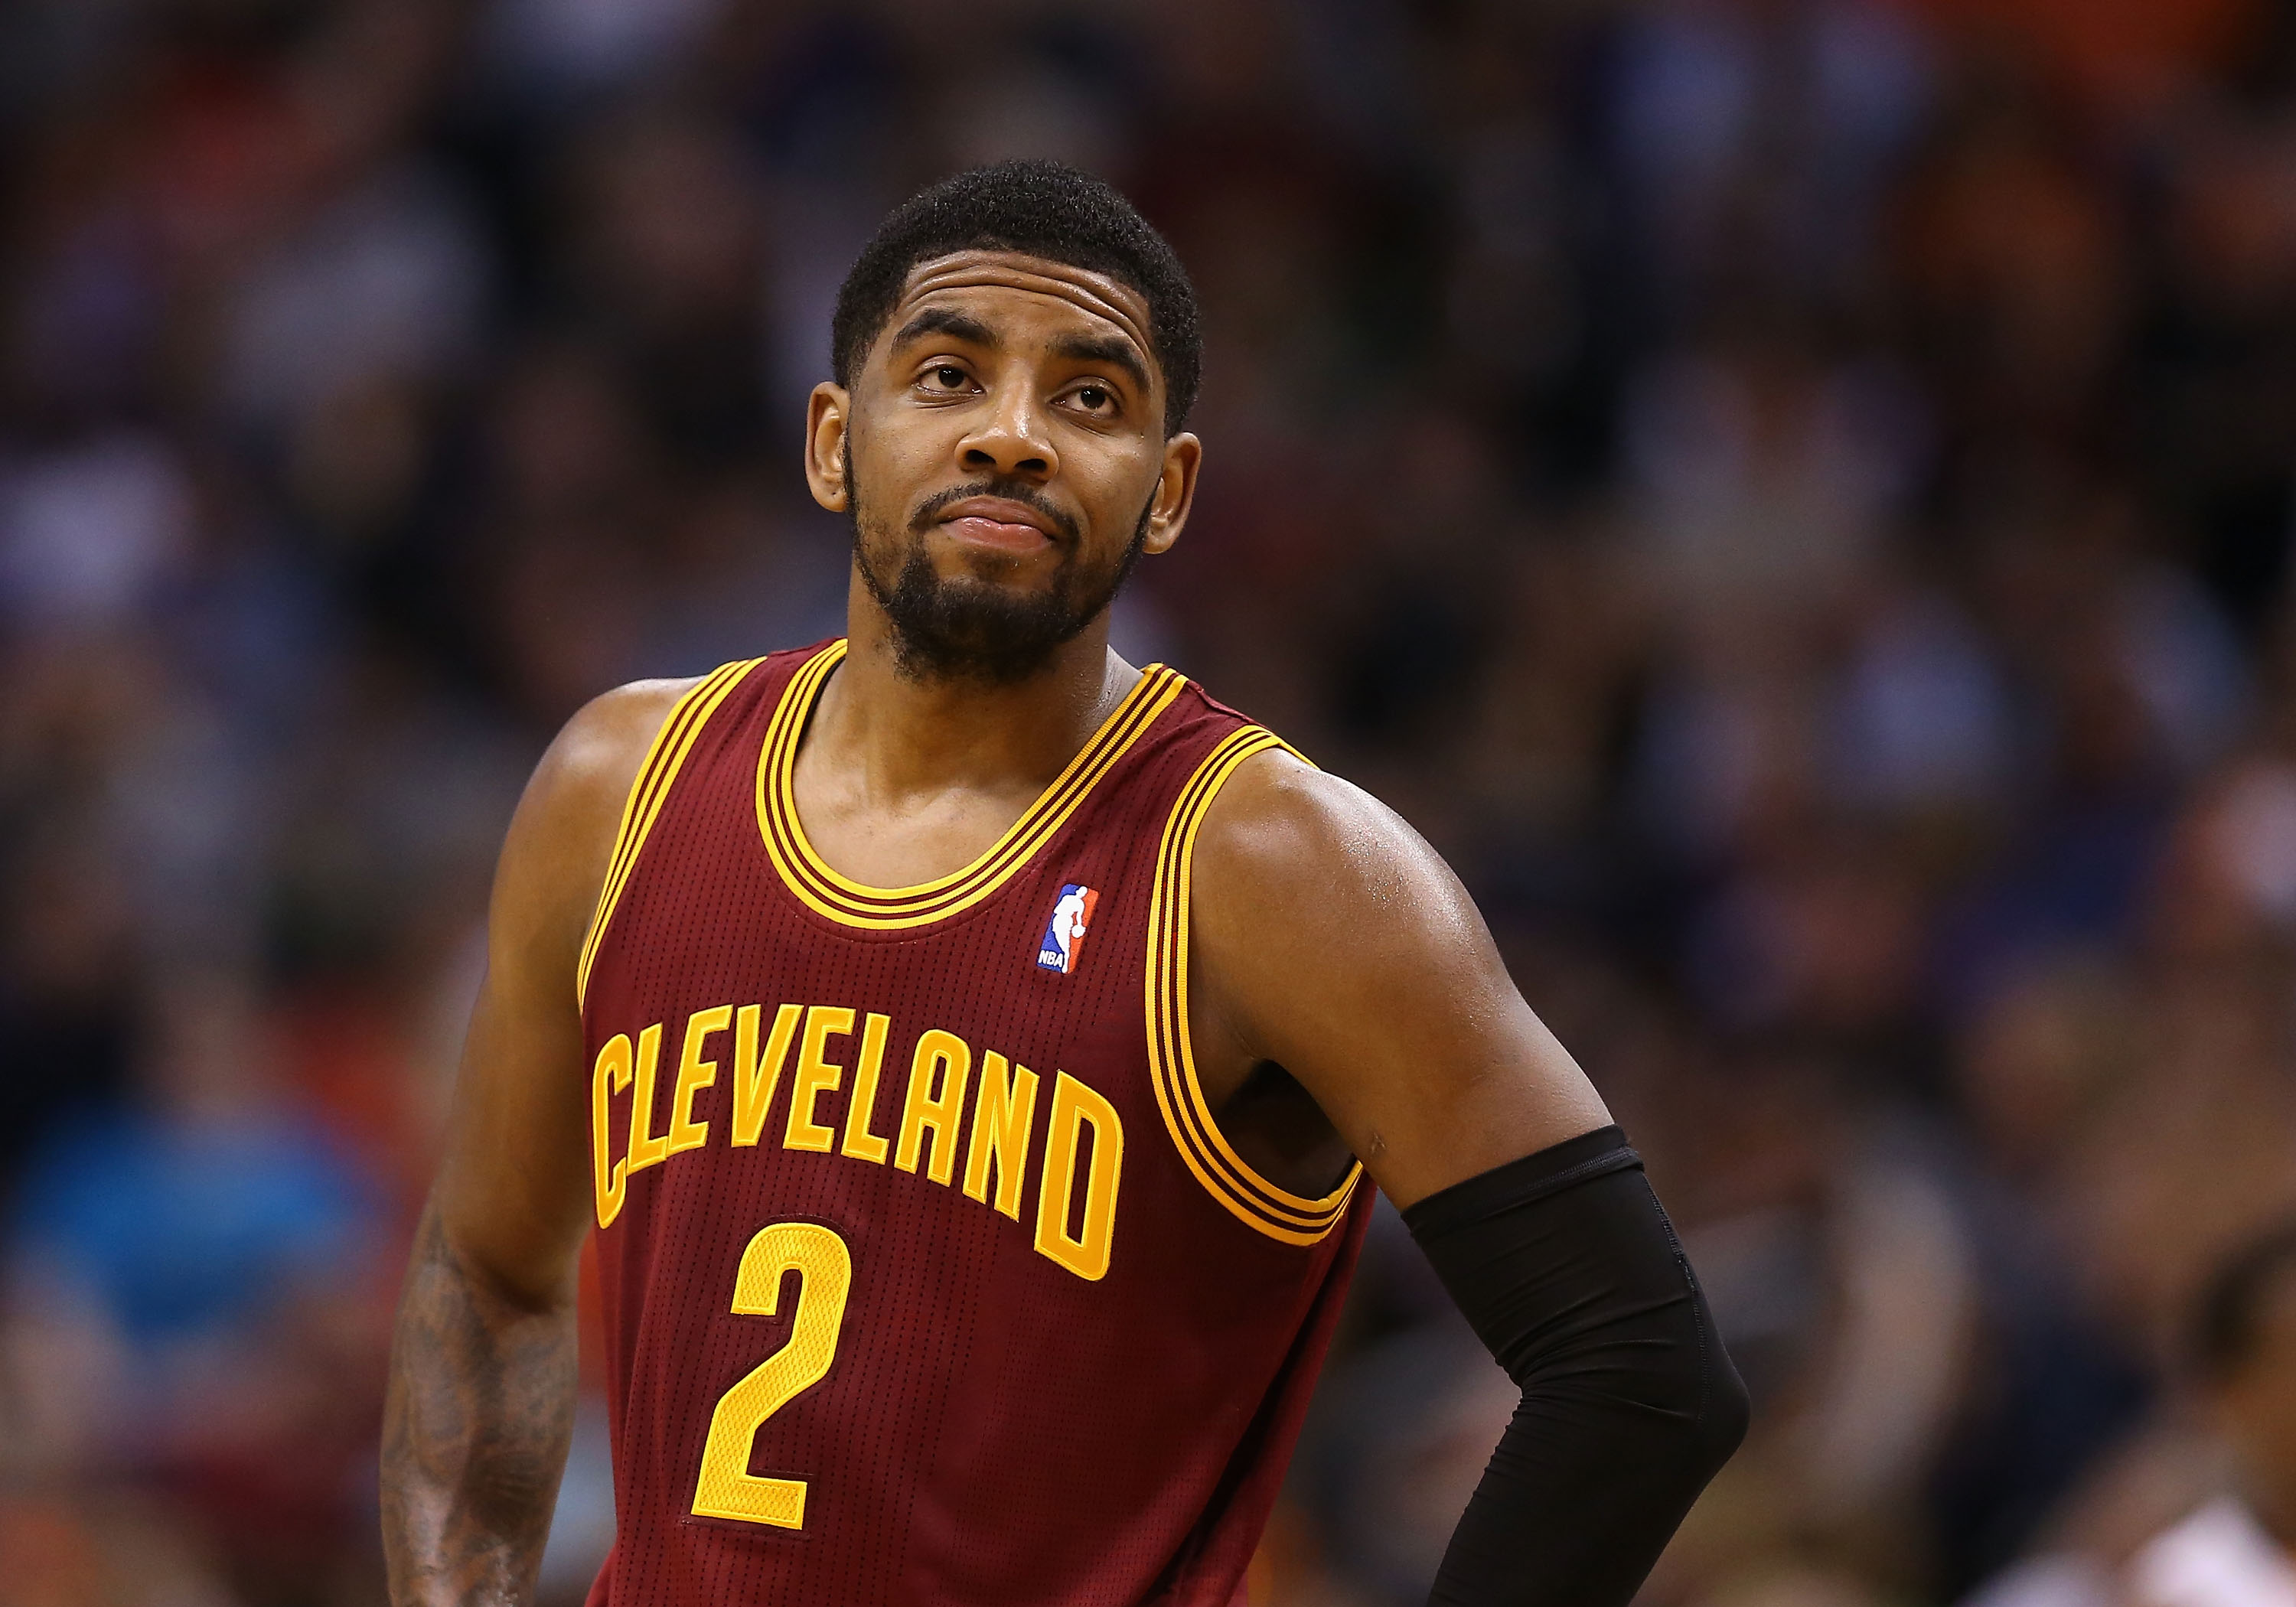 Cleveland Cavaliers Kyrie Irving Wallpaper High Definition